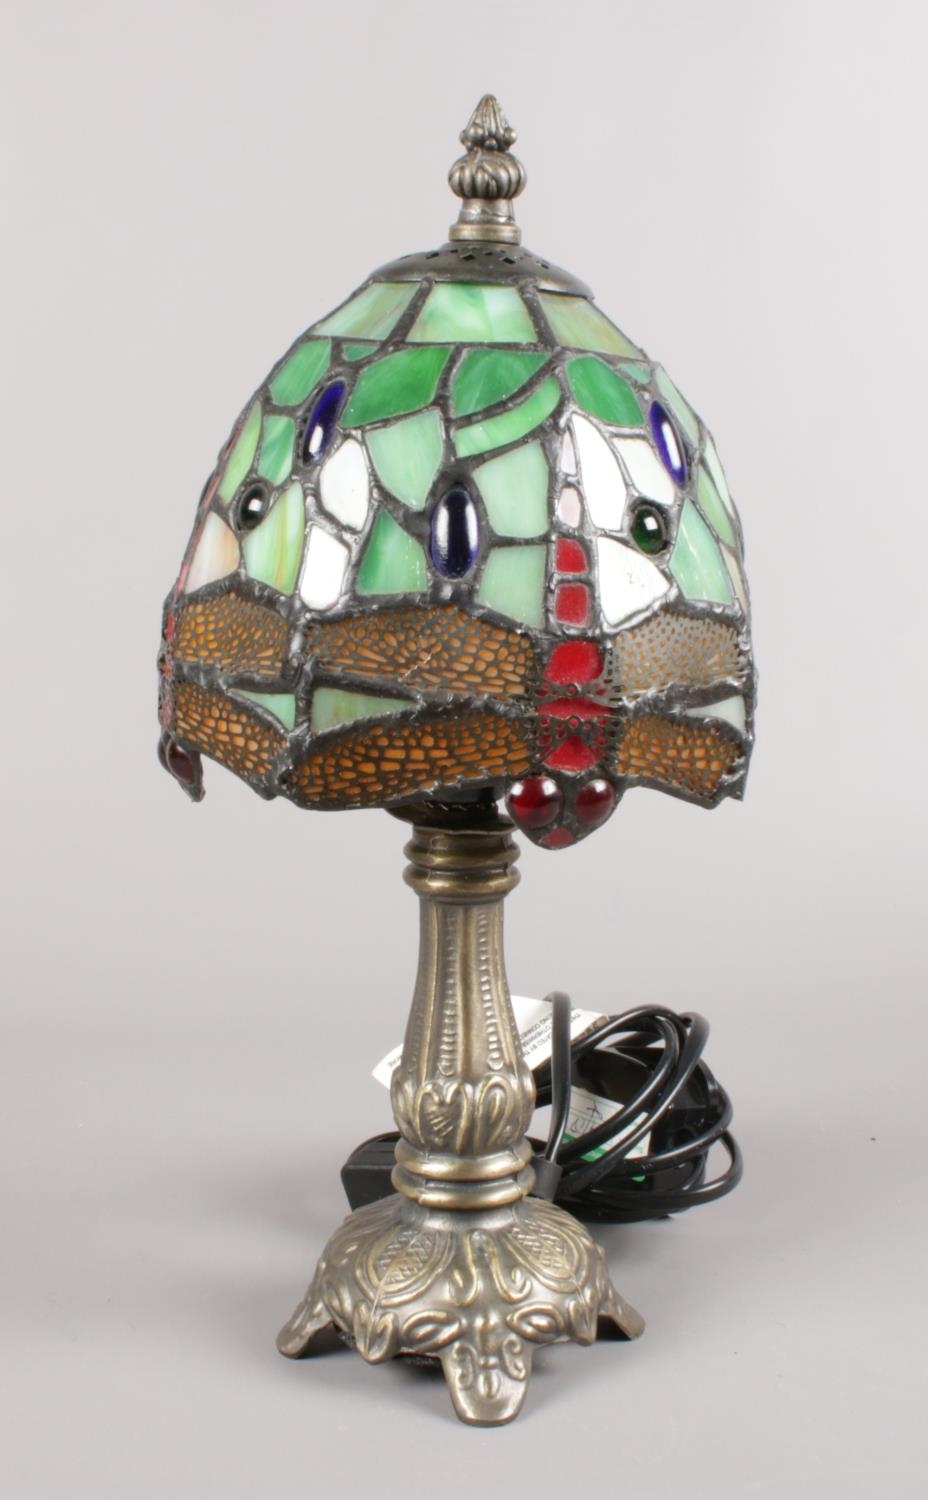 A Tiffany style dragon fly table lamp. (32cm height) Some of the glass has cracked on the shade.